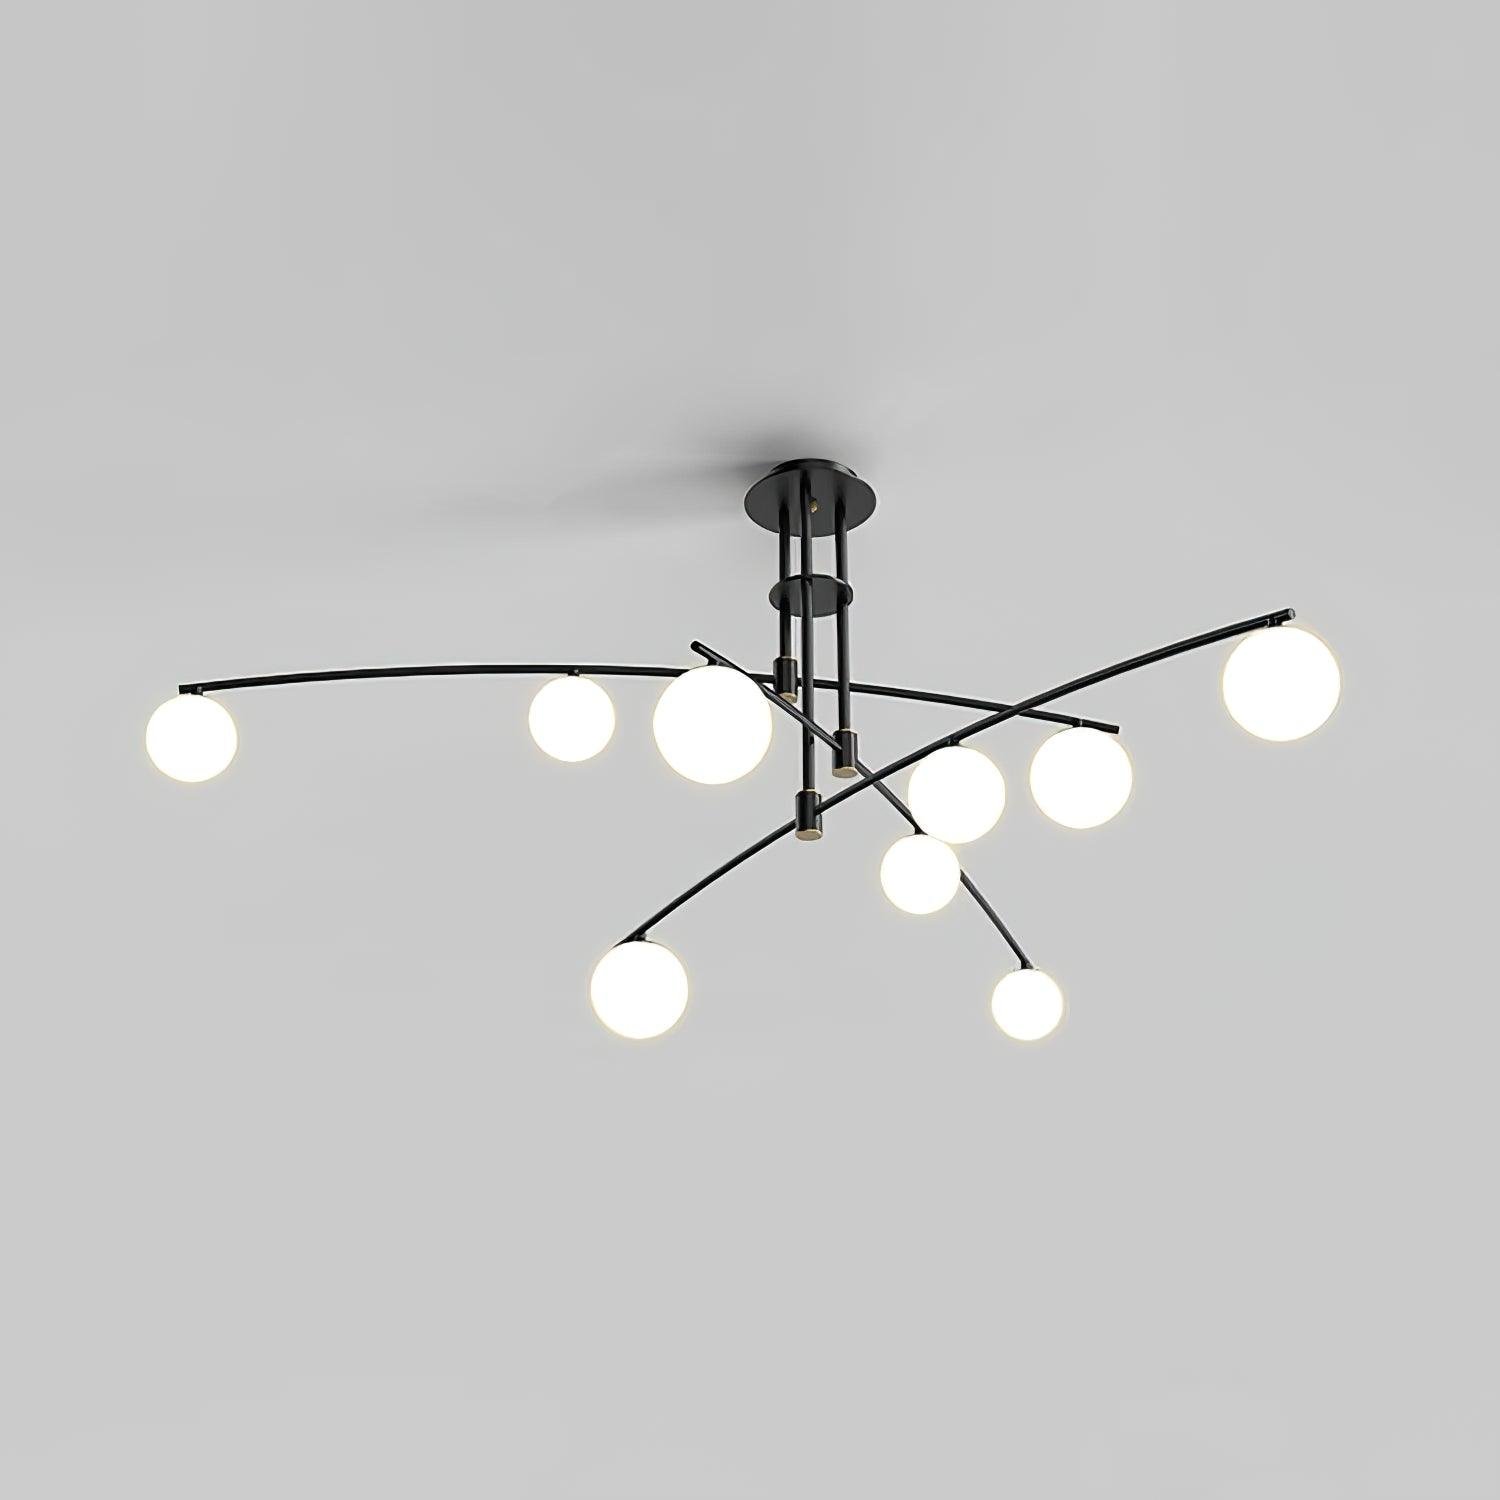 Black Modern Long Arm Chandelier with 9 Heads, measuring 57.1 inches in diameter and 17.7 inches in height (or 145cm x 45cm)